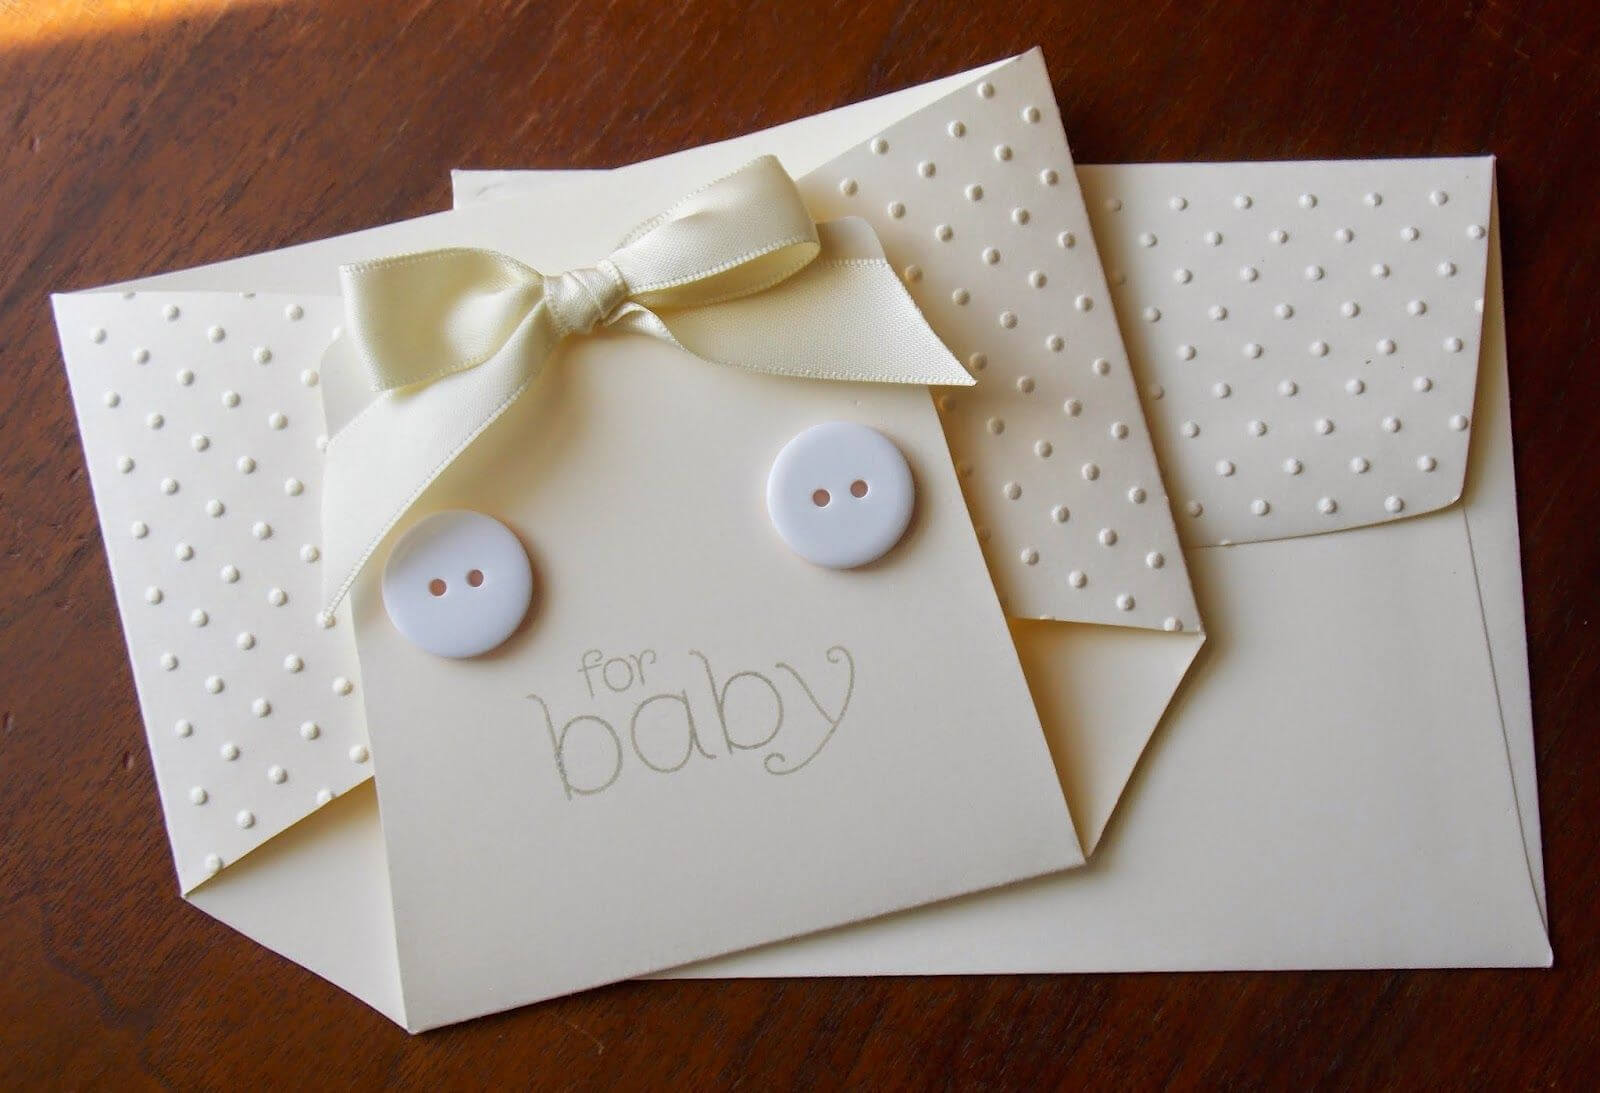 Hand Crafted Baby Gift Card Holder From Laura's Works Of Throughout Shut Up And Take My Money Card Template